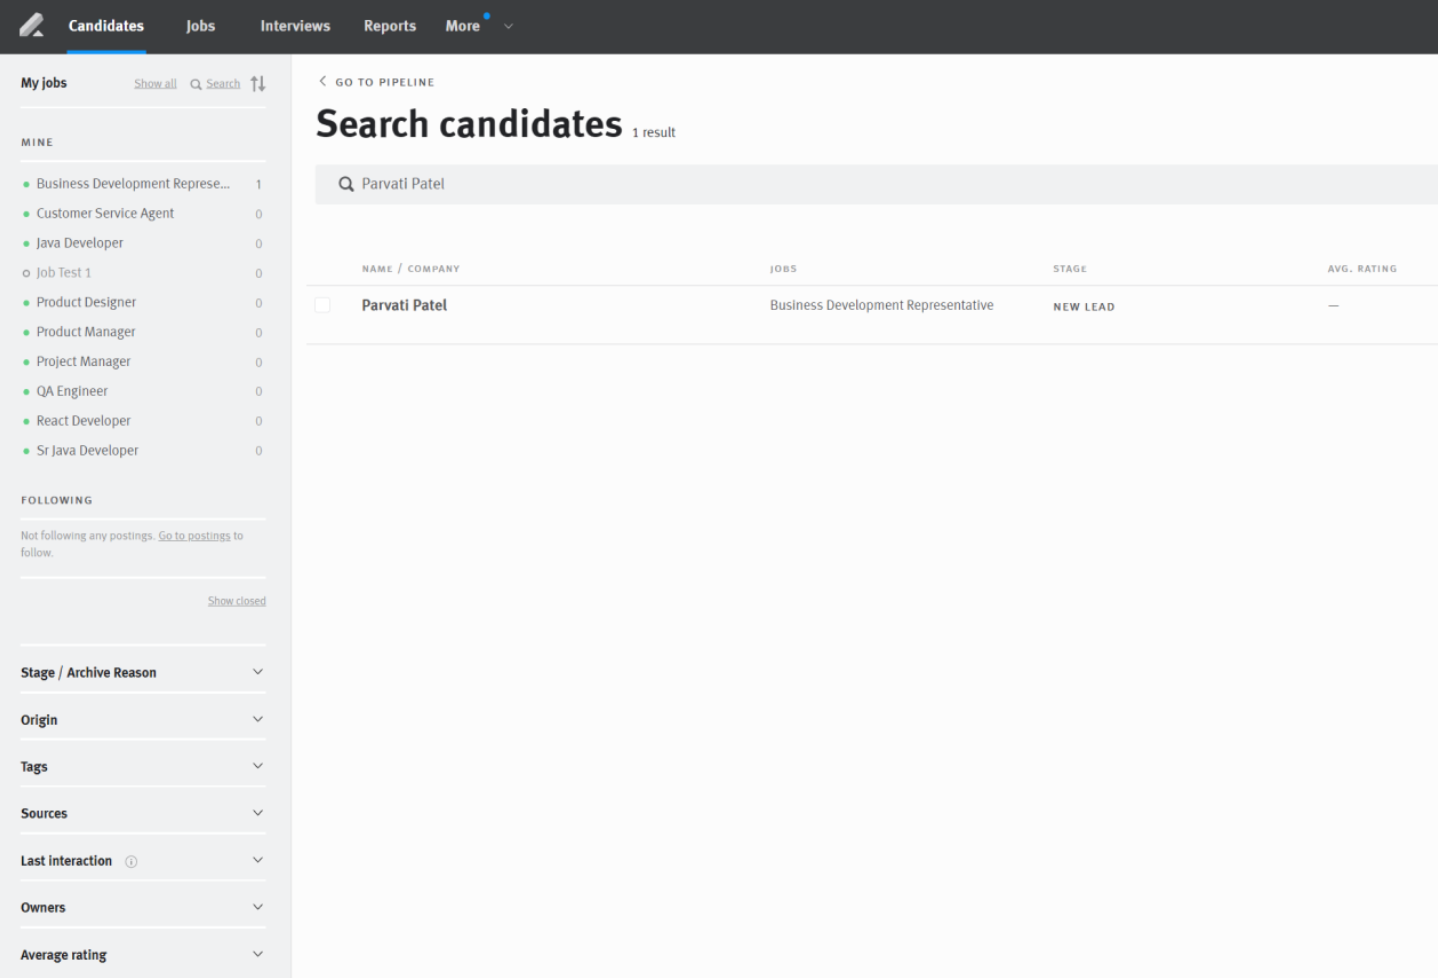 Lever search candidates page.